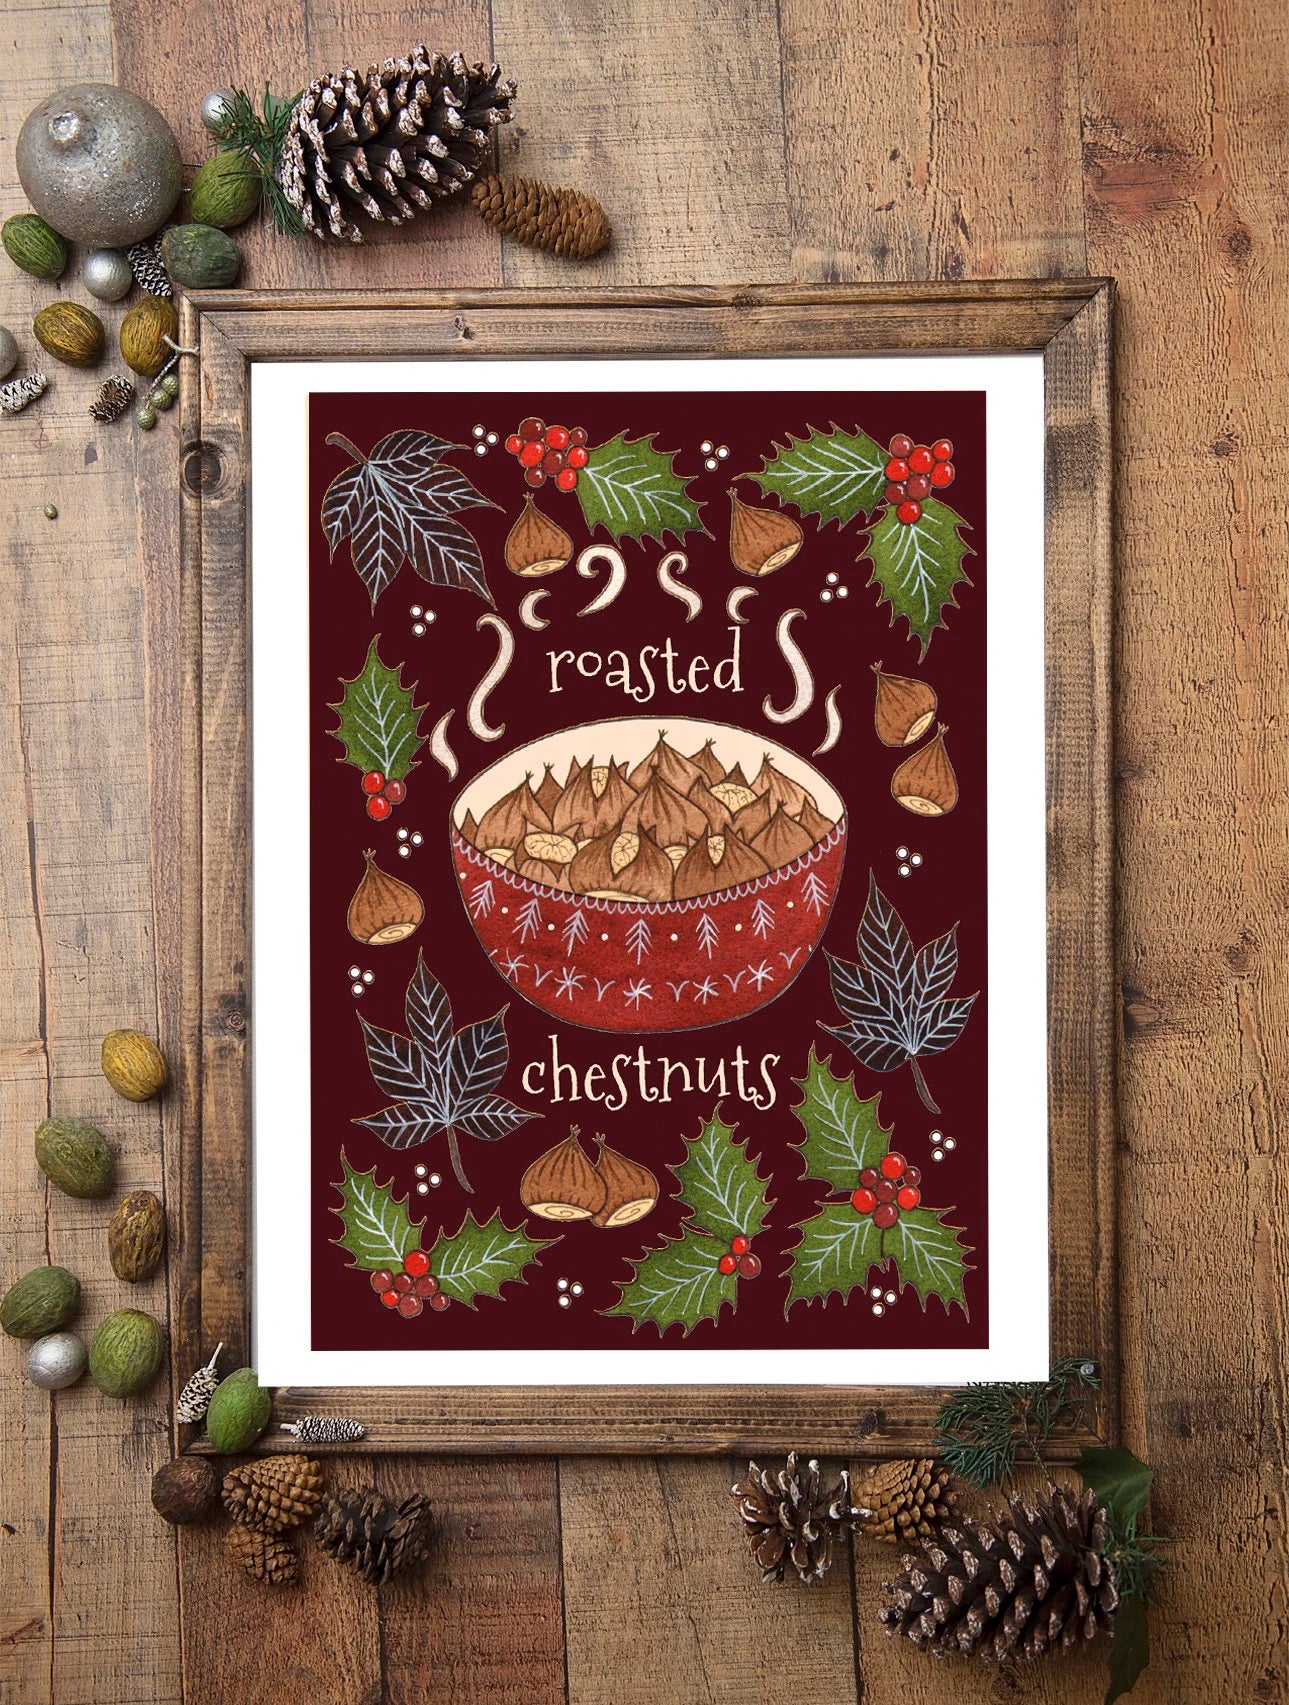 Roasted Chestnuts Print - A5 - A4 - A3 Cosy Festive Winter Illustration Print - Brown Red Winter Christmas Whimsical Food Decor Wall Art